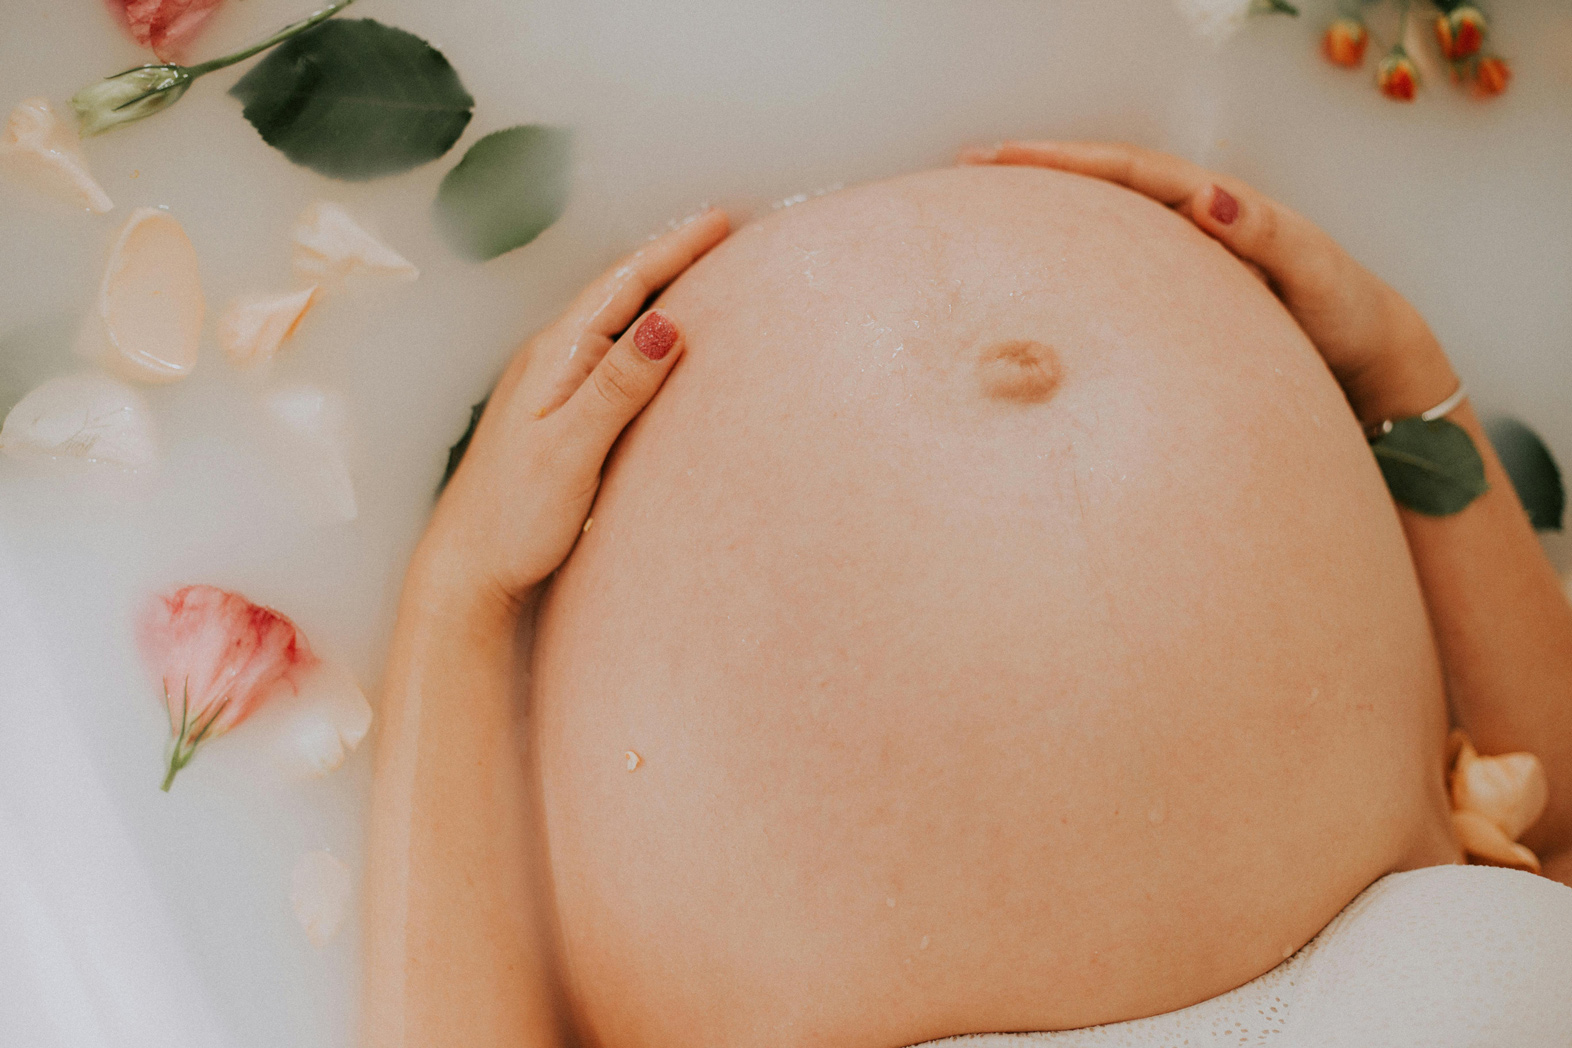 A pregnant person relaxing in a bath with floral petals, exploring Chinese Medicine for fertility.